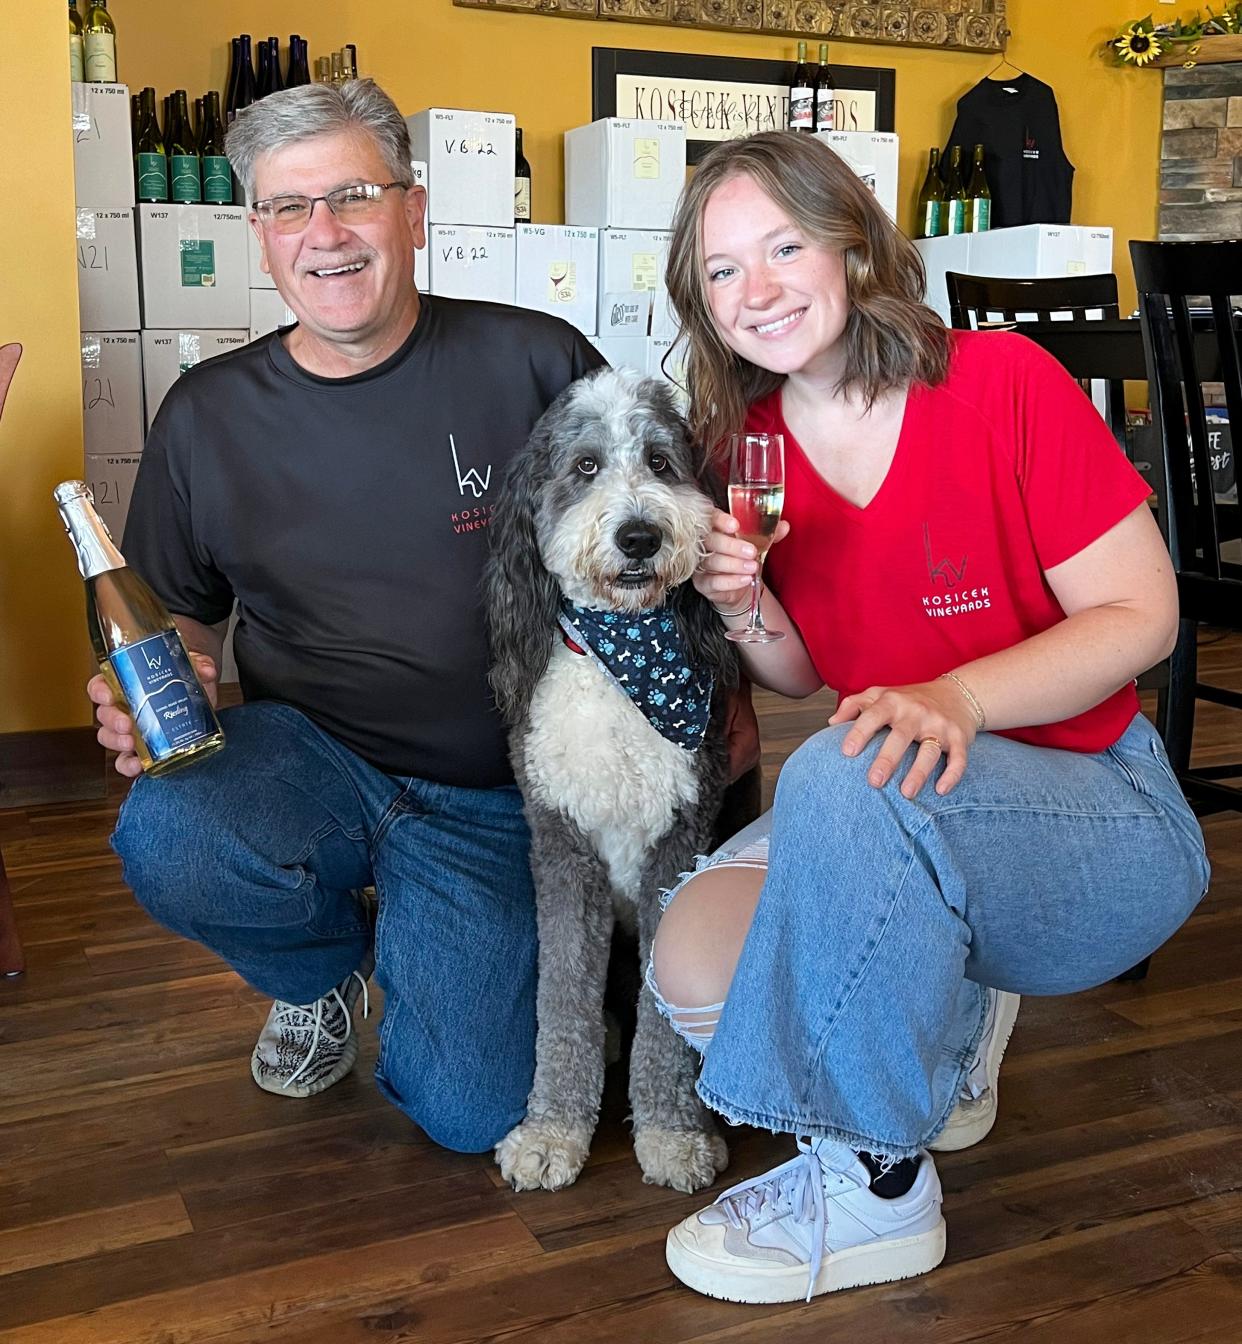 Tony Kosicek and his daughter Emma take a picture with winery dog Brix on Sept. 6 in Geneva.